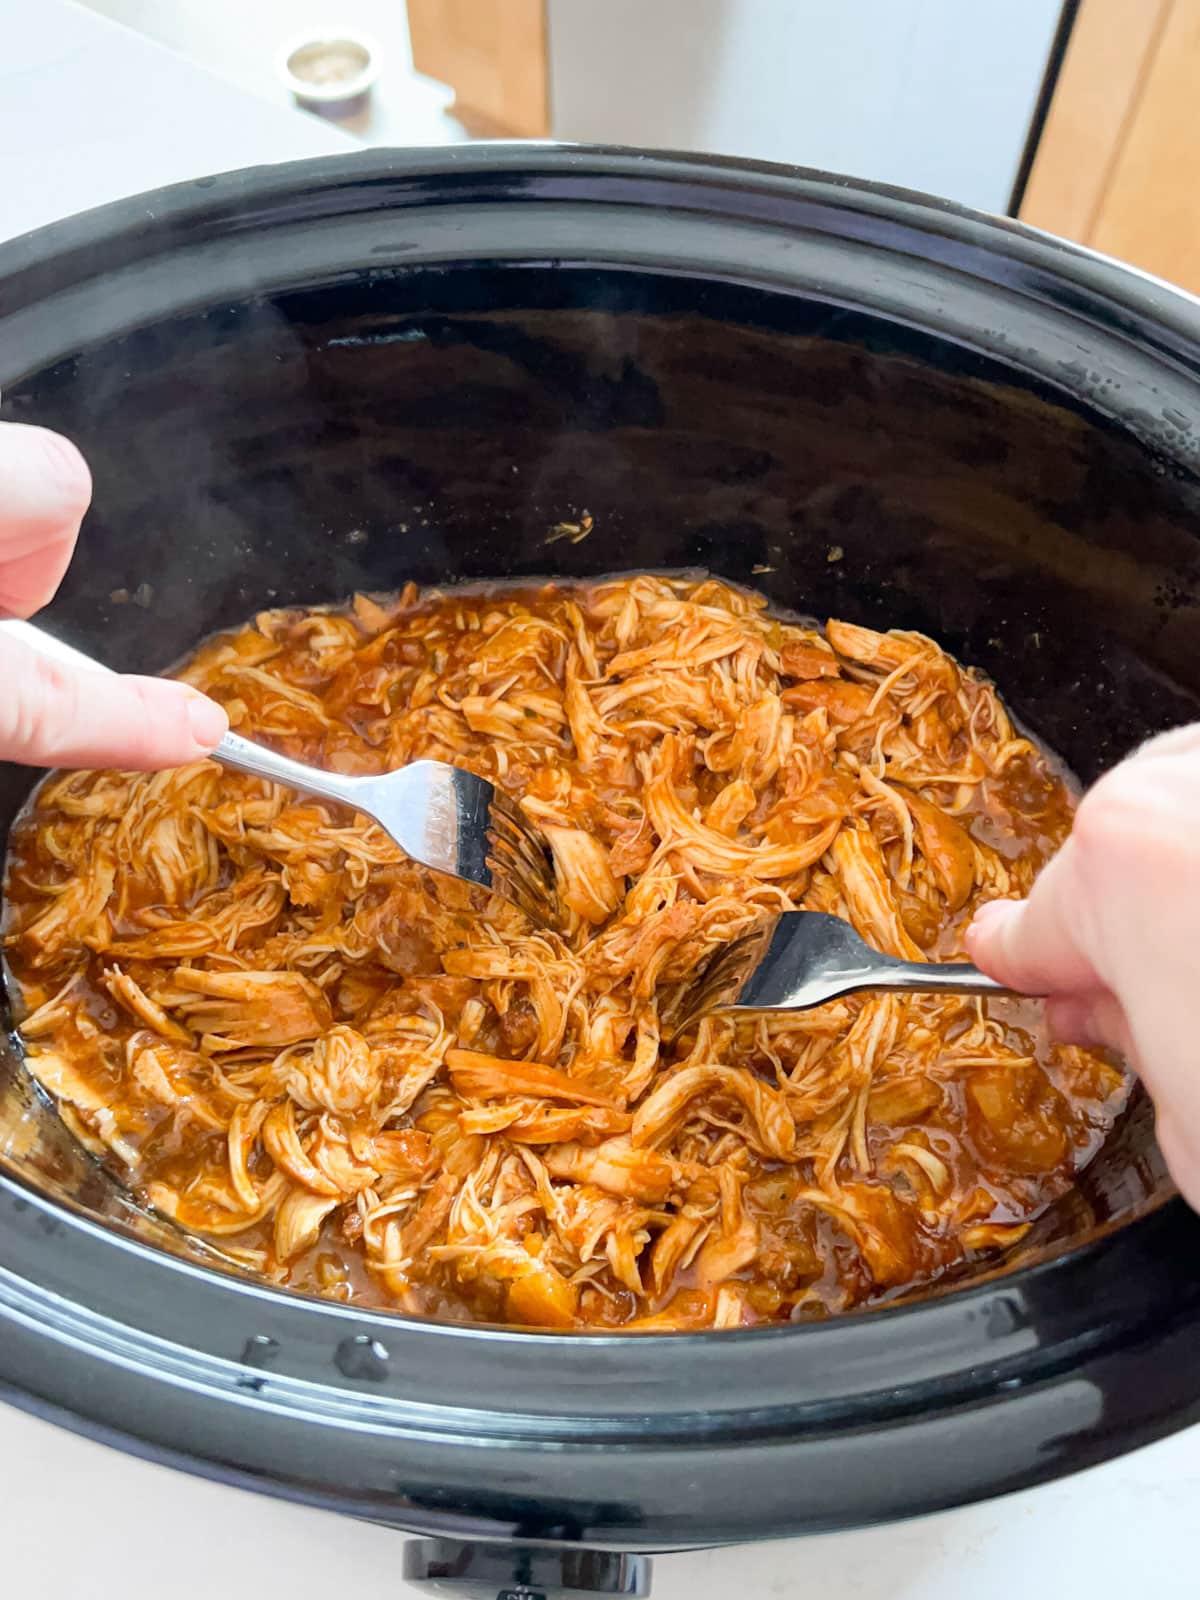 Hands using two forks to shred the cooked chicken in the crockpot.